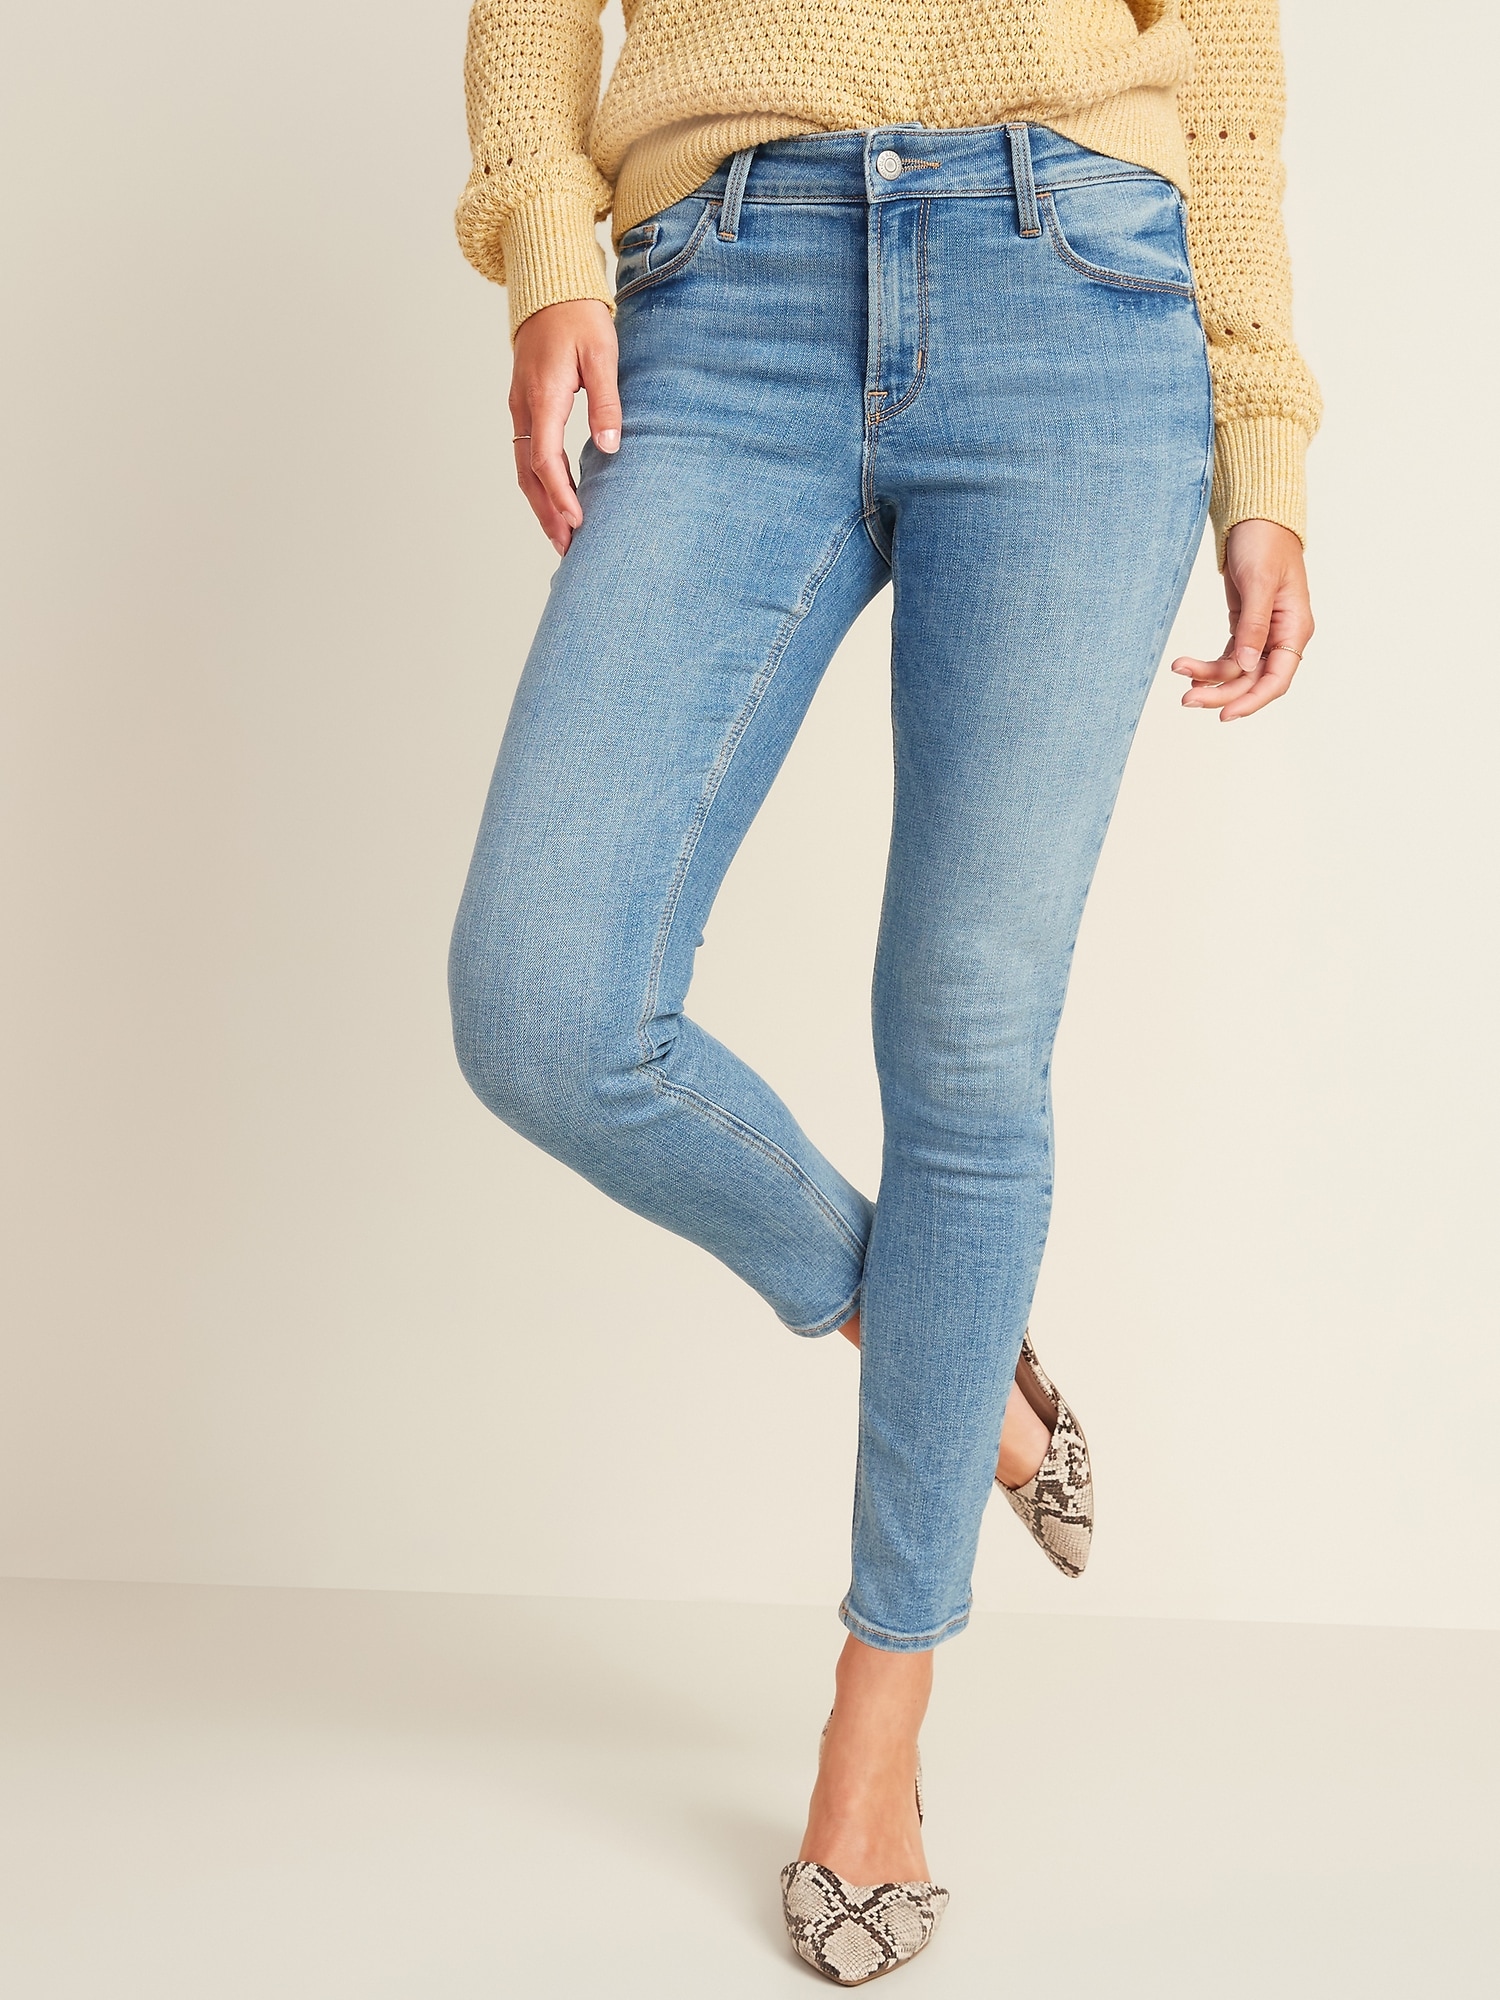 old navy original mid rise skinny jeans